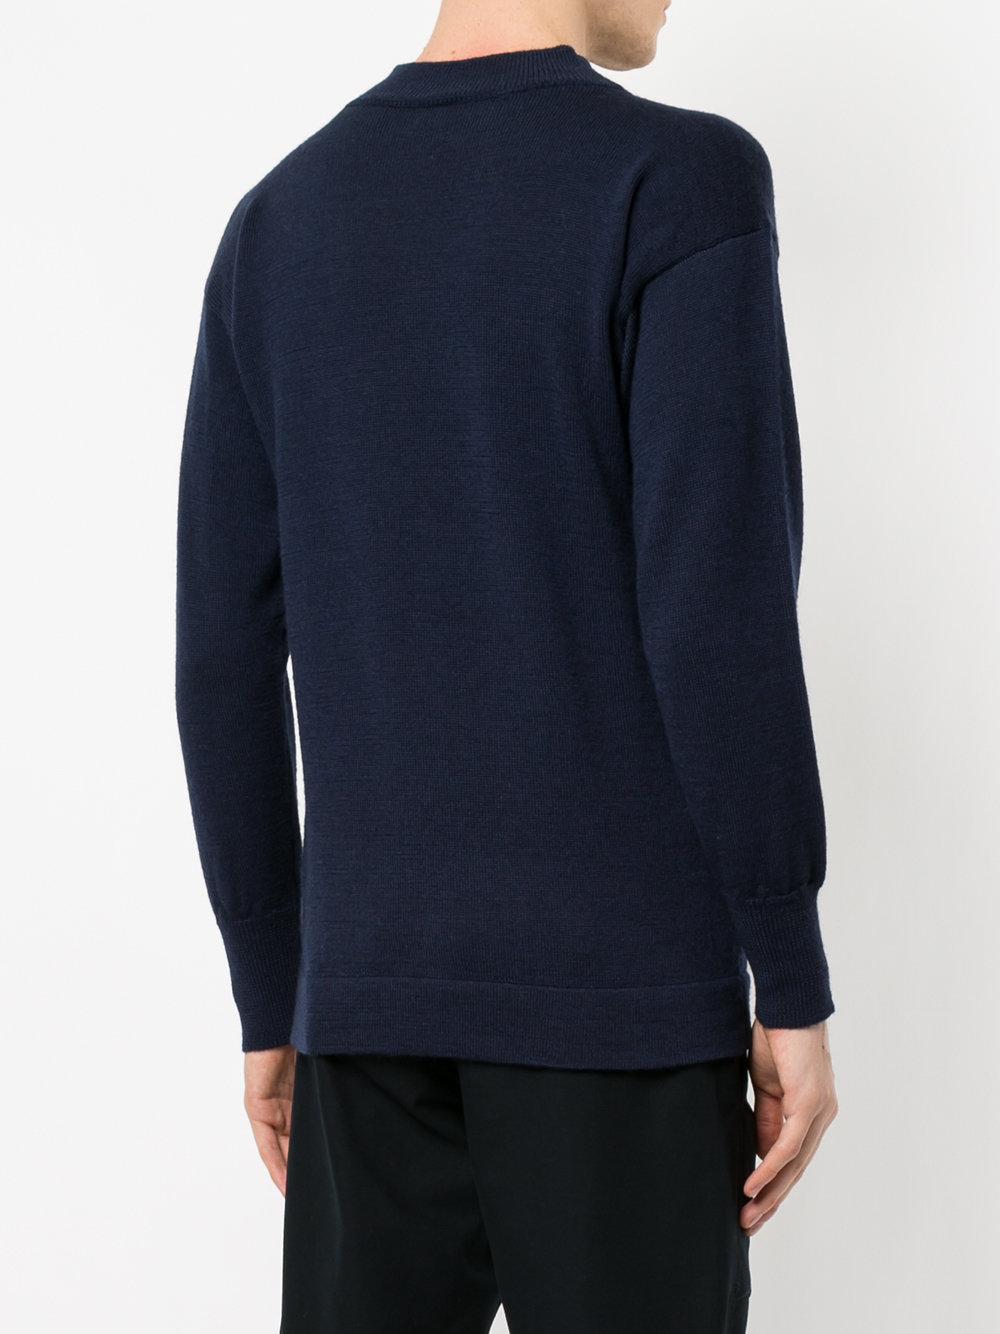 Kent & Curwen Wool Badge Patch Sweater in Blue for Men - Lyst